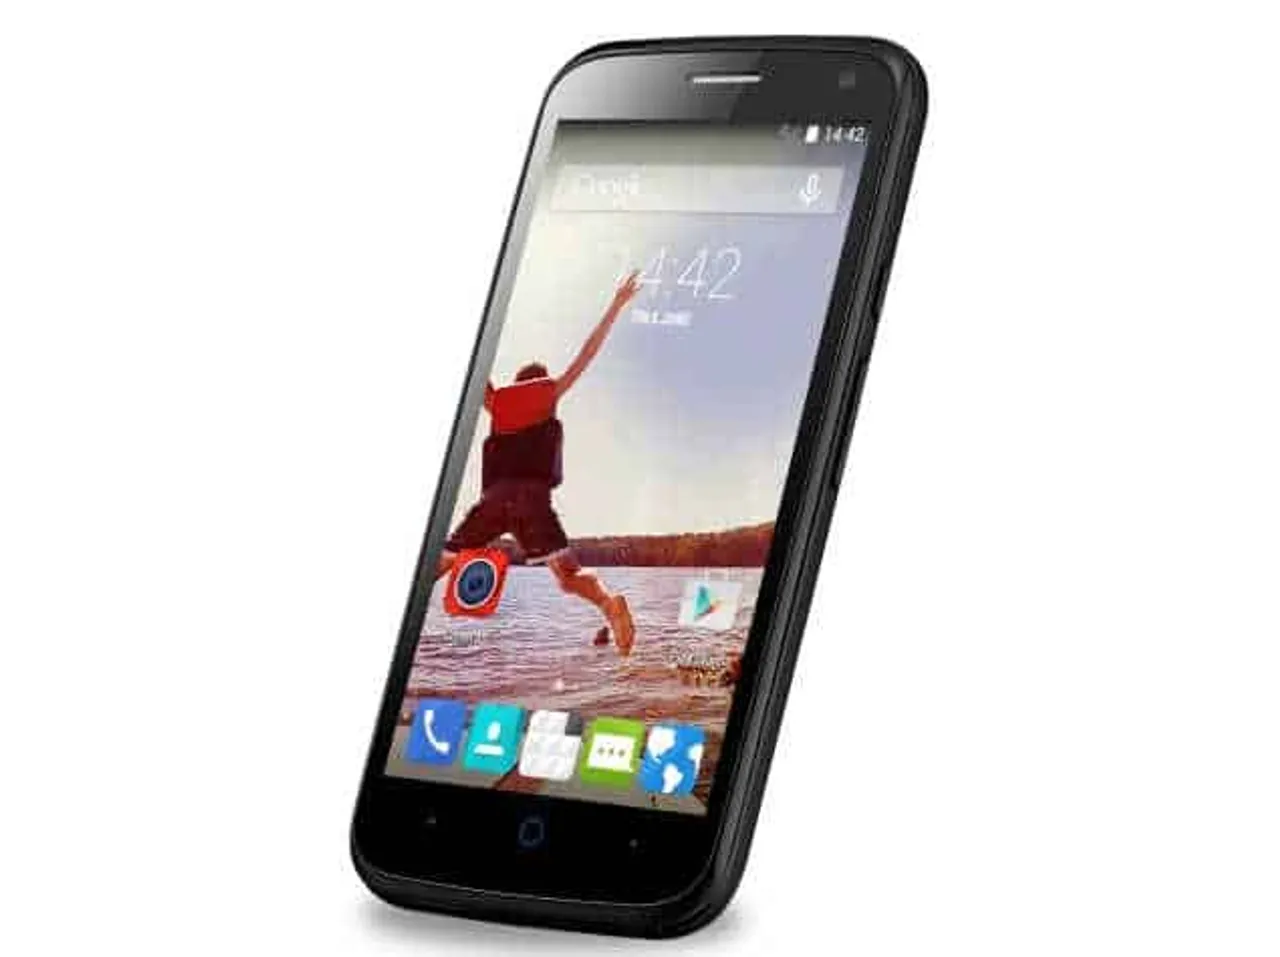 ZTE unleashes the 4G smartphone revolution with launch of blade Qlux 4G